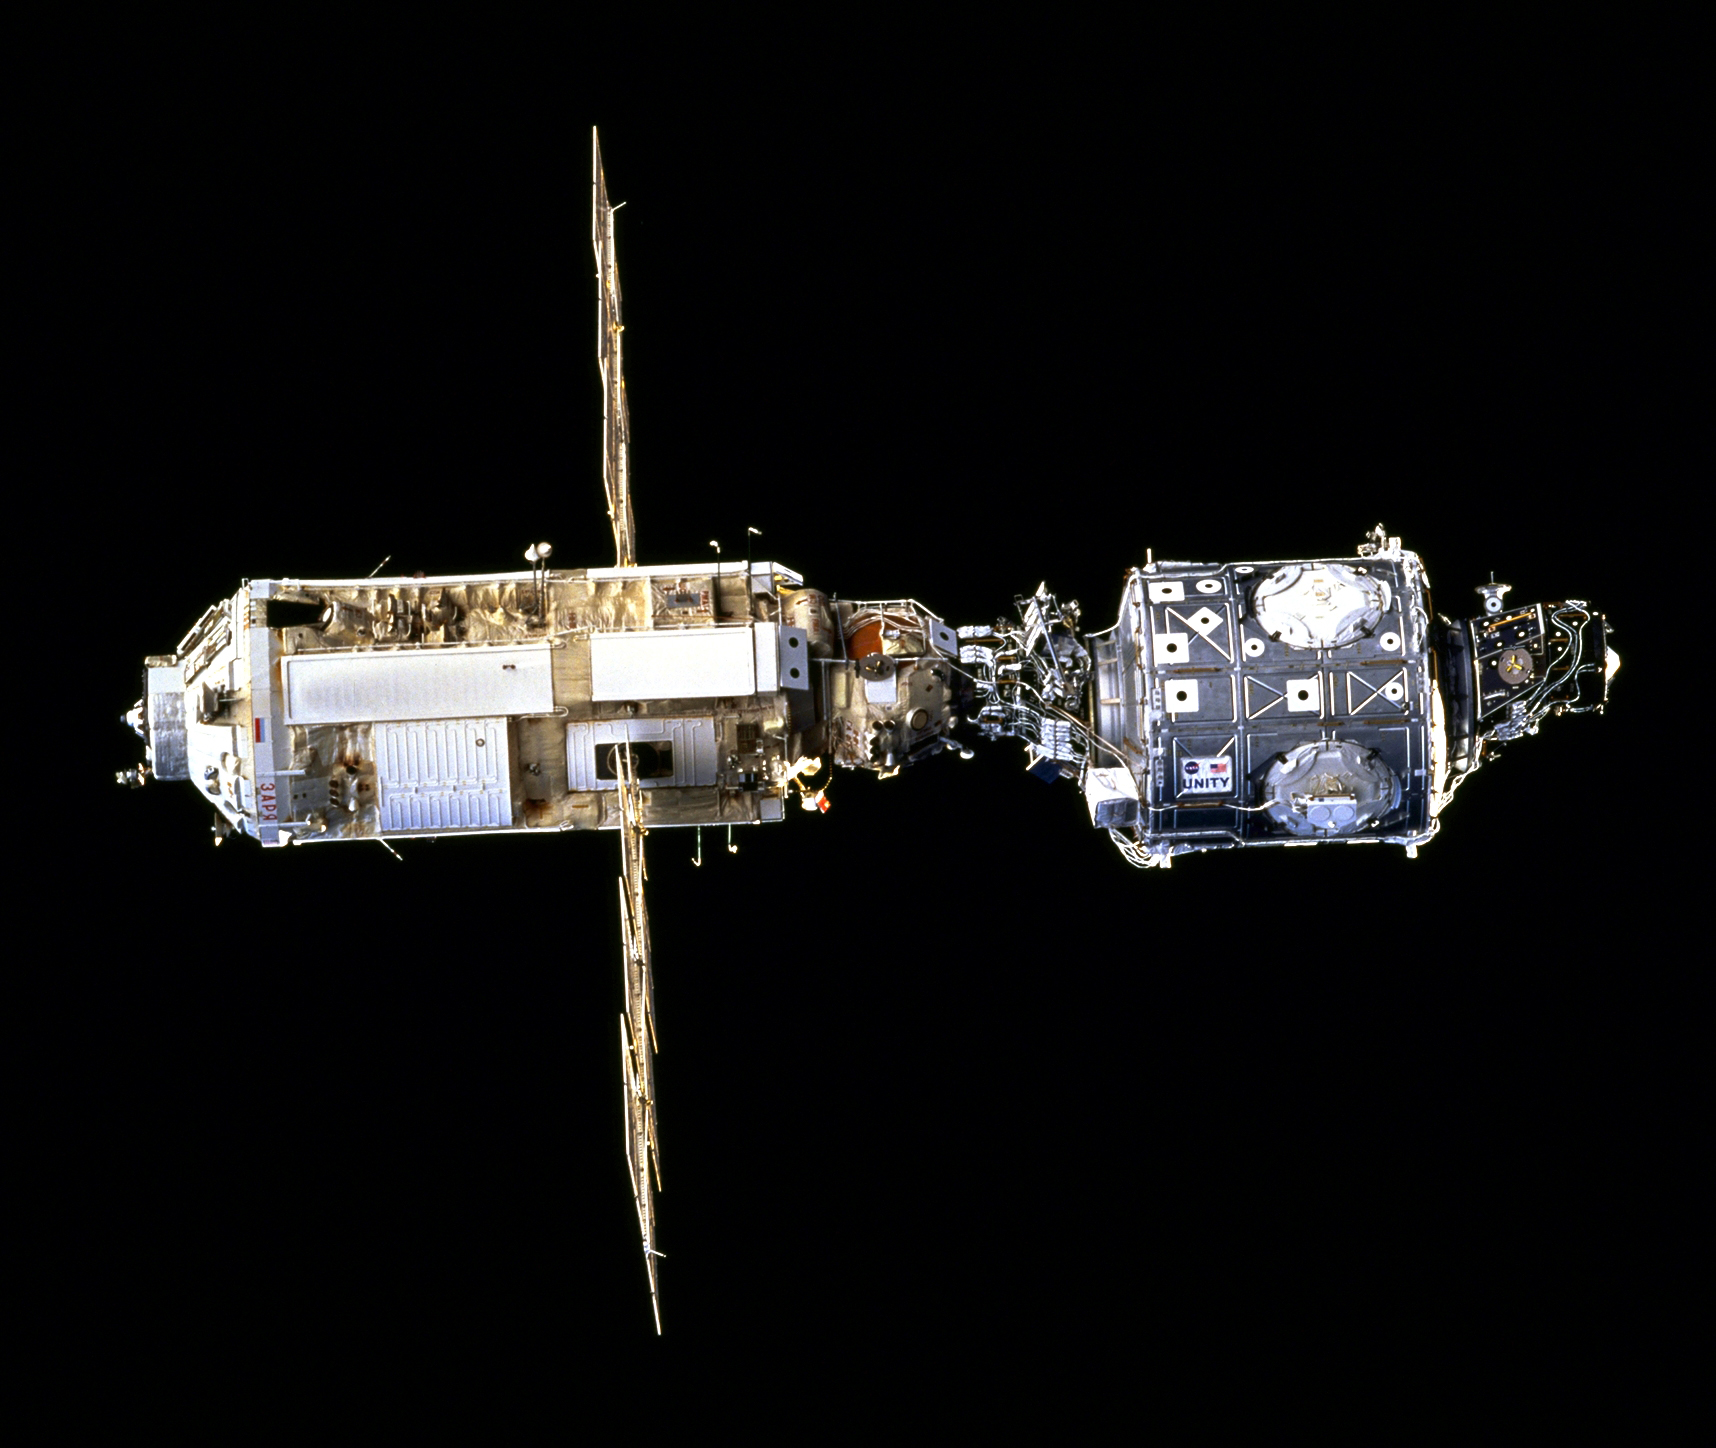  Zarya, left, and Unity as seen by the departing STS-88 crew in December 1998. Credit: NASA 